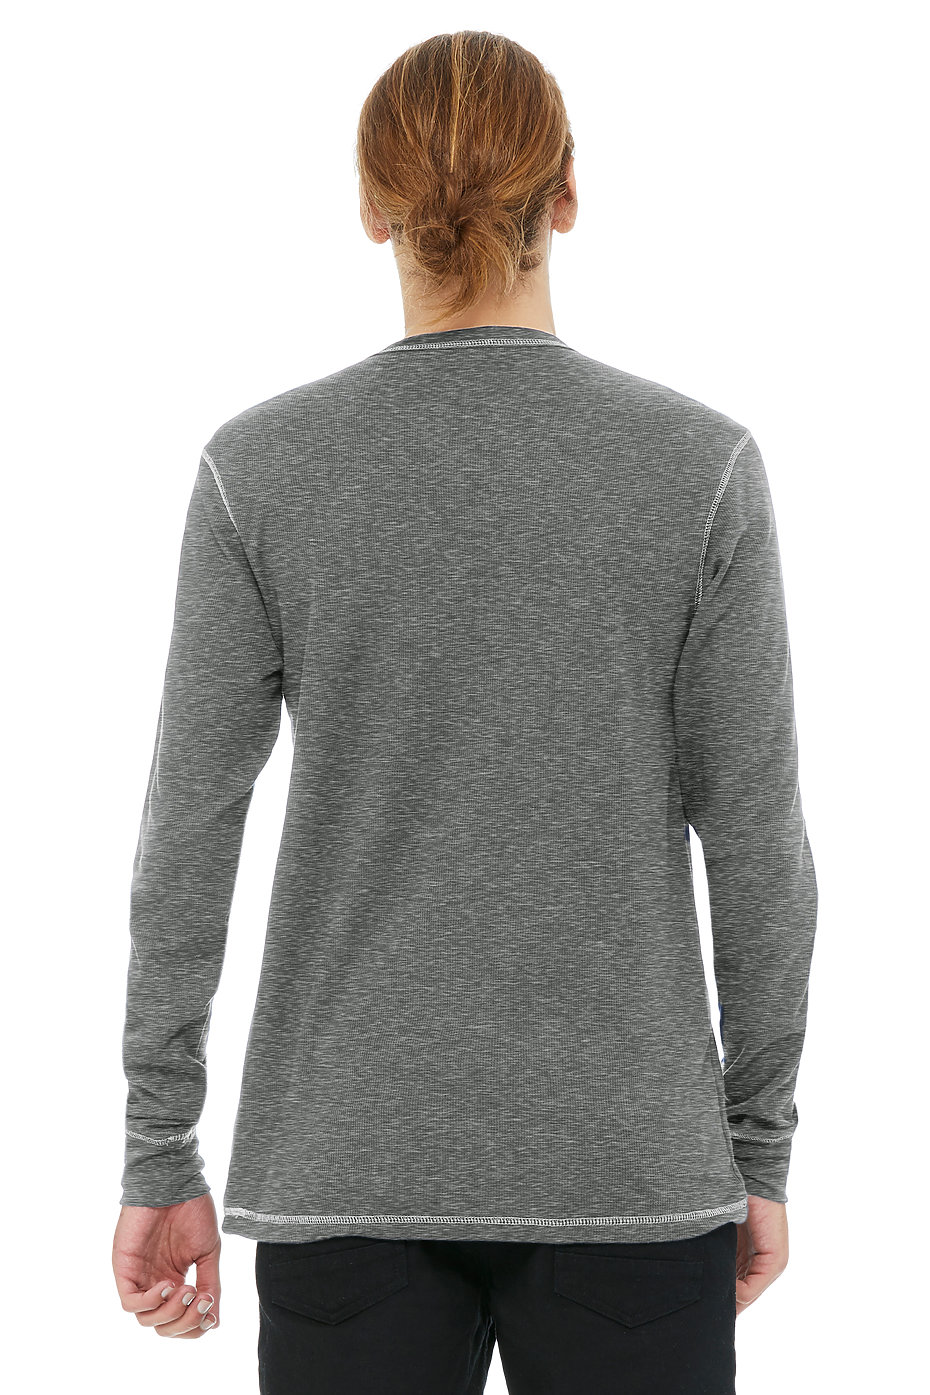 Thermal Shirts Wholesale | Thermals For Men | Wholesale Long Sleeve ...